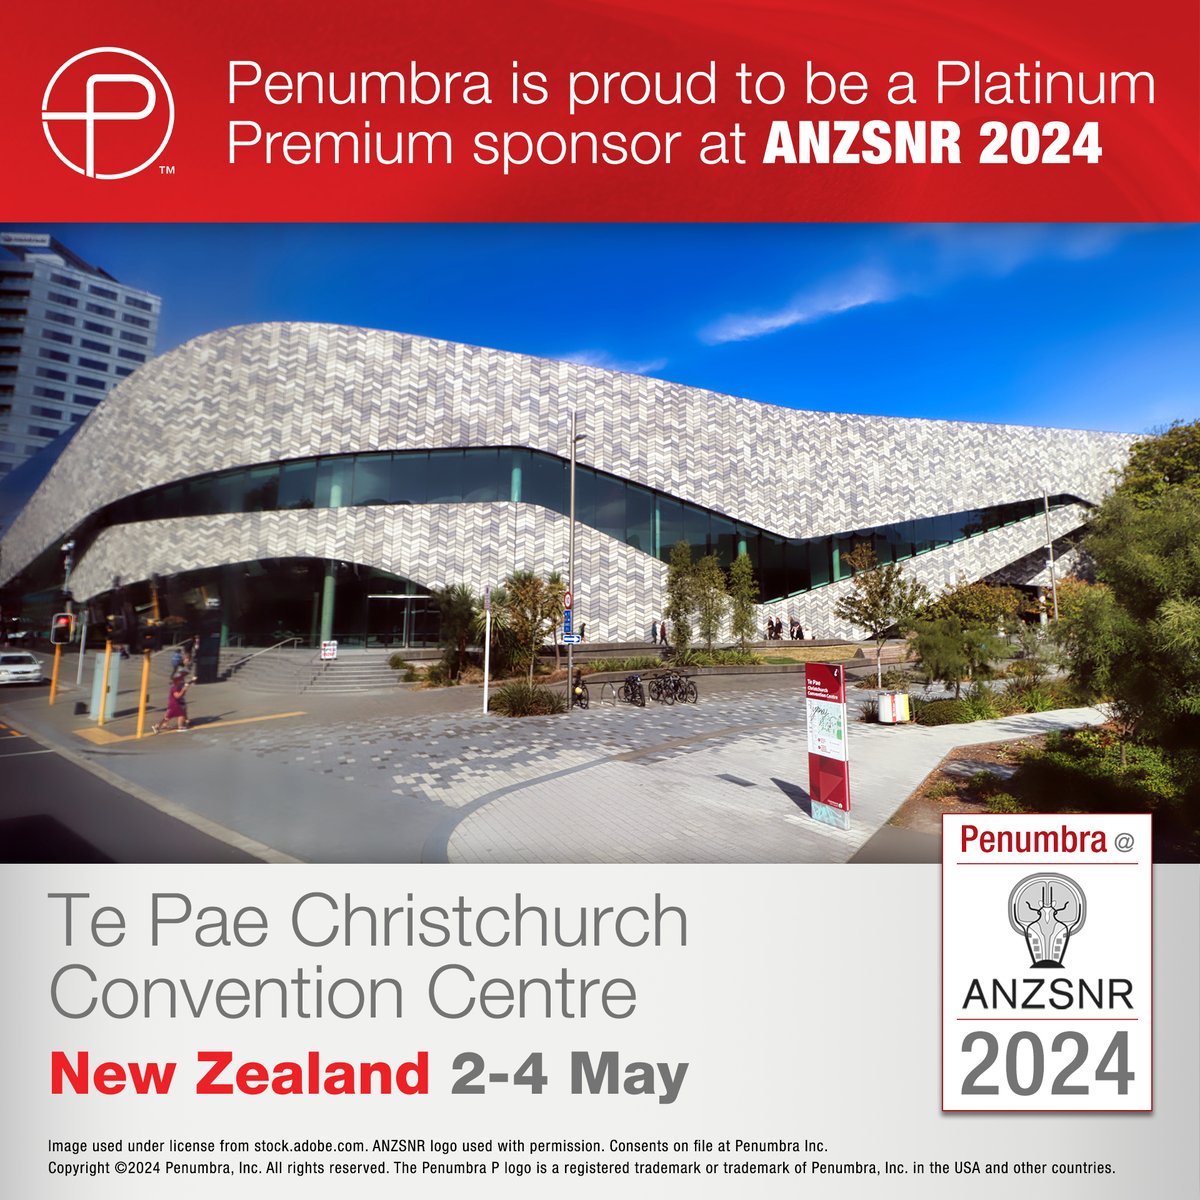 The countdown to ANZSNR 2024 is on, and Penumbra is proud to be a Platinum Premium sponsor! #SafetySpeedSimplicity #NOWISTHETIME 🇳🇿✨